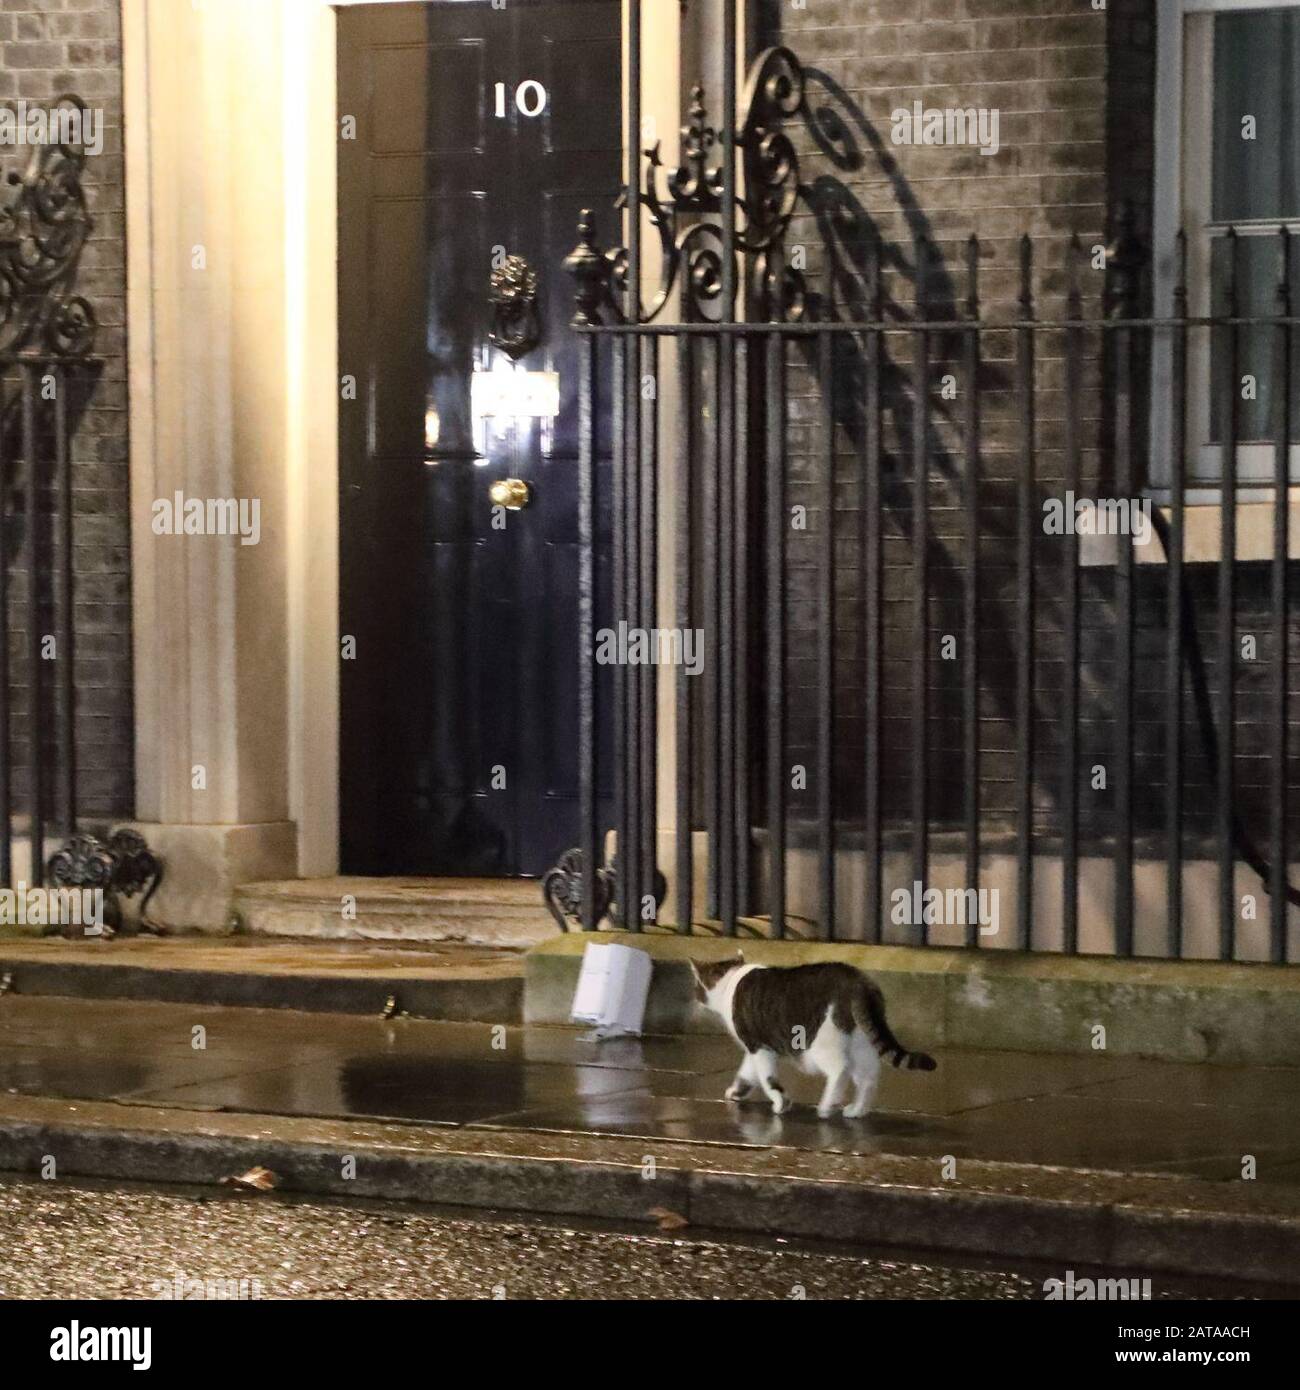 London, UK, 31st Jan 2020, While Londoners gather in Westminster for the final hours of Great Britain’s EU membership, Larry the cat patrols Downing Street unaware of the historic moment of Brexit Day. Credit: Uwe Deffner / Alamy Live News Stock Photo